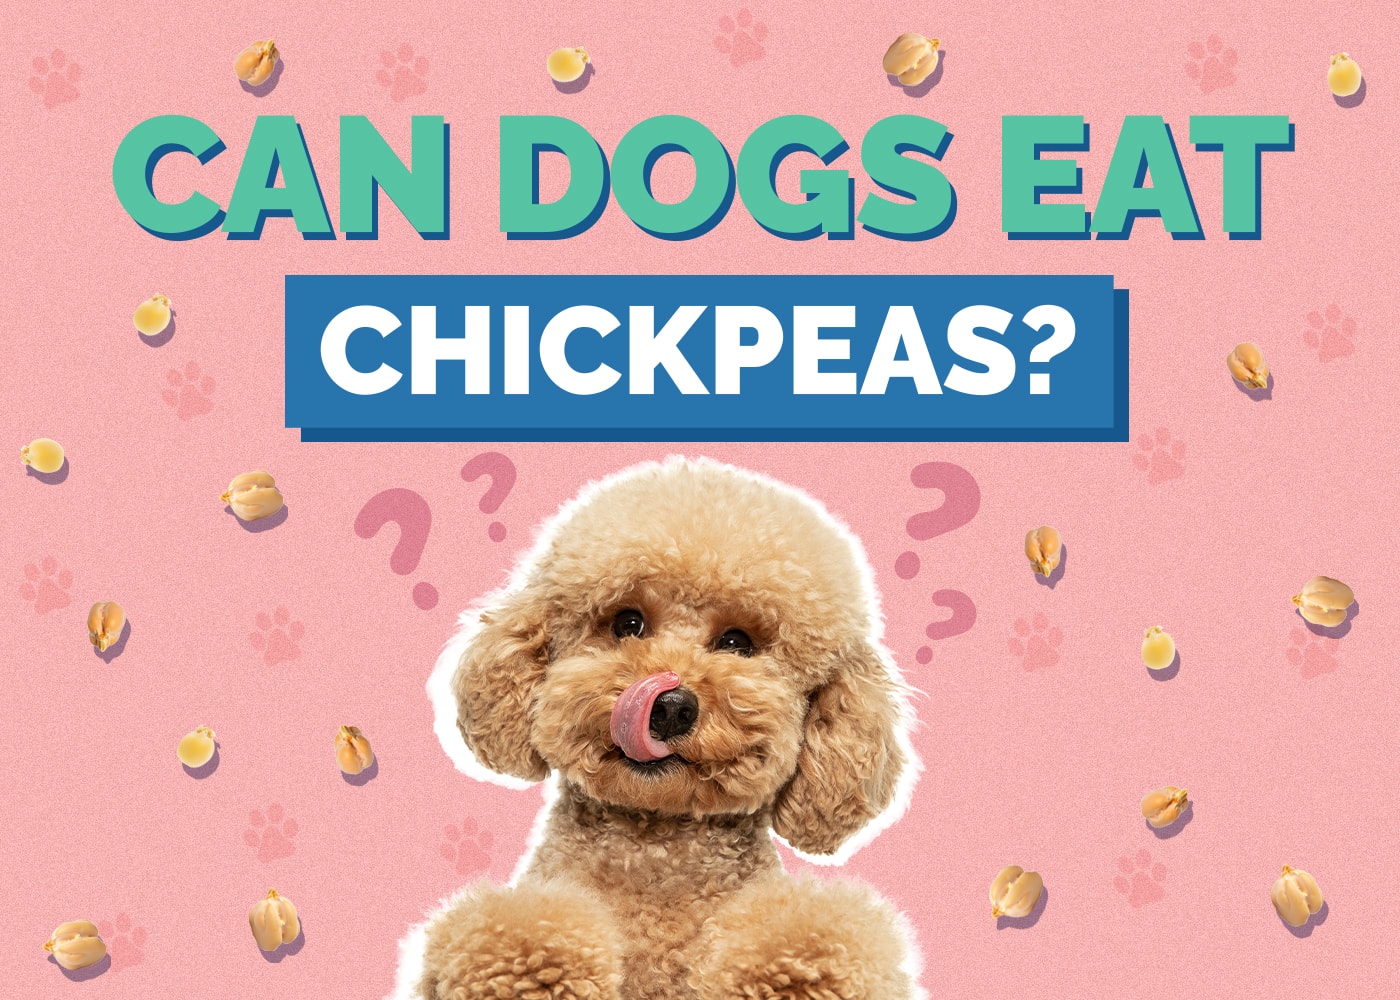 Can Dog Eat chickpeas